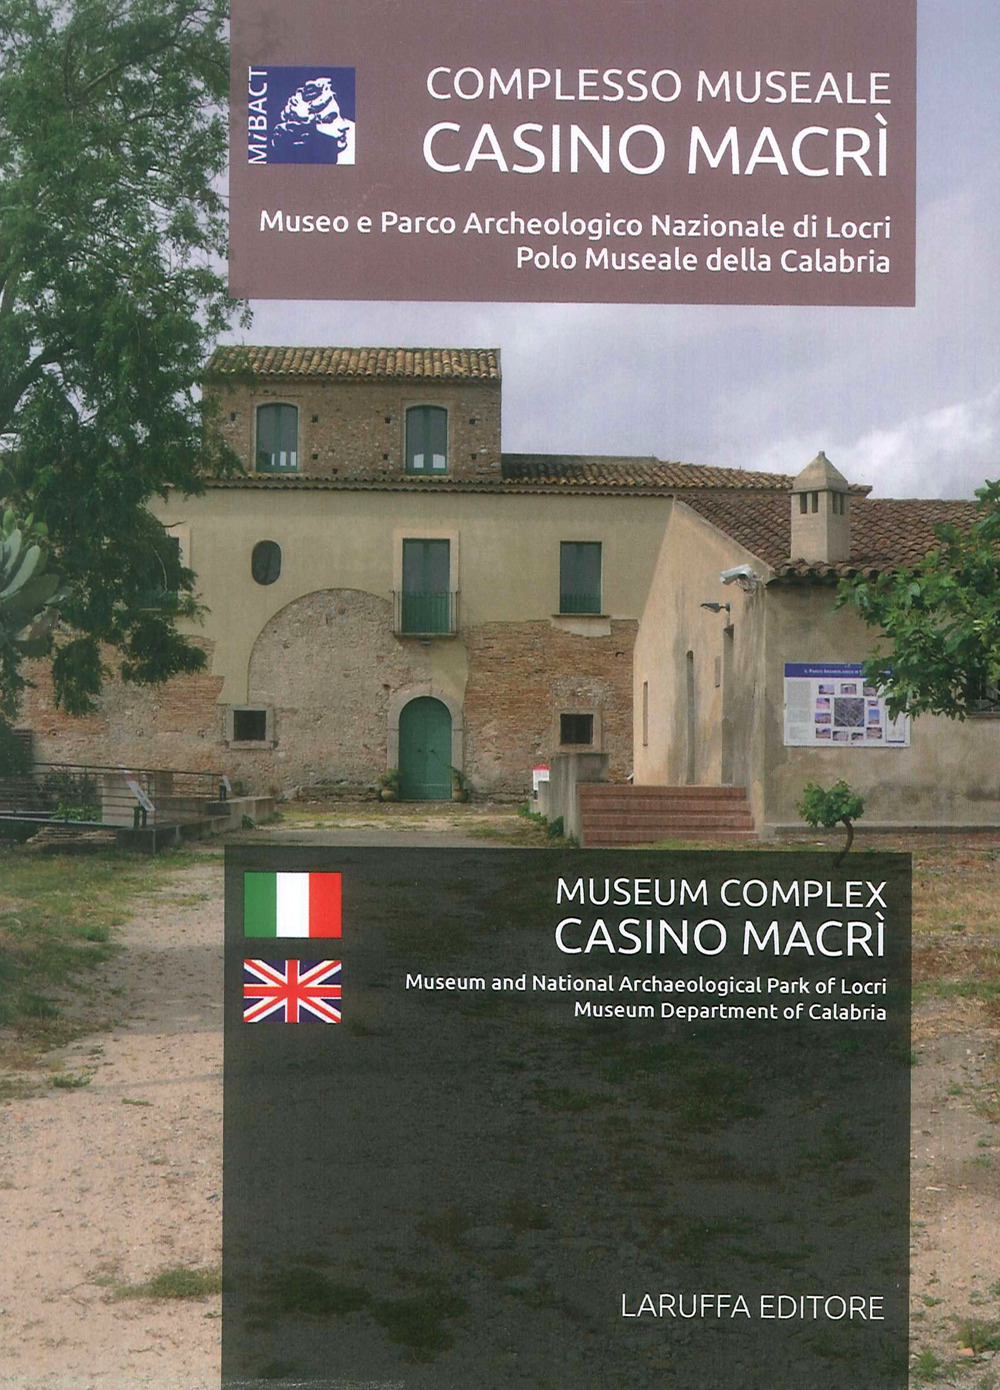 Complesso Museale Casino Macrì. Museo e Parco Archeologico Nazionale di Locri Polo Museale della Calabria-Museum and National Archaeological Park of Locri, Museum Department of Calabria